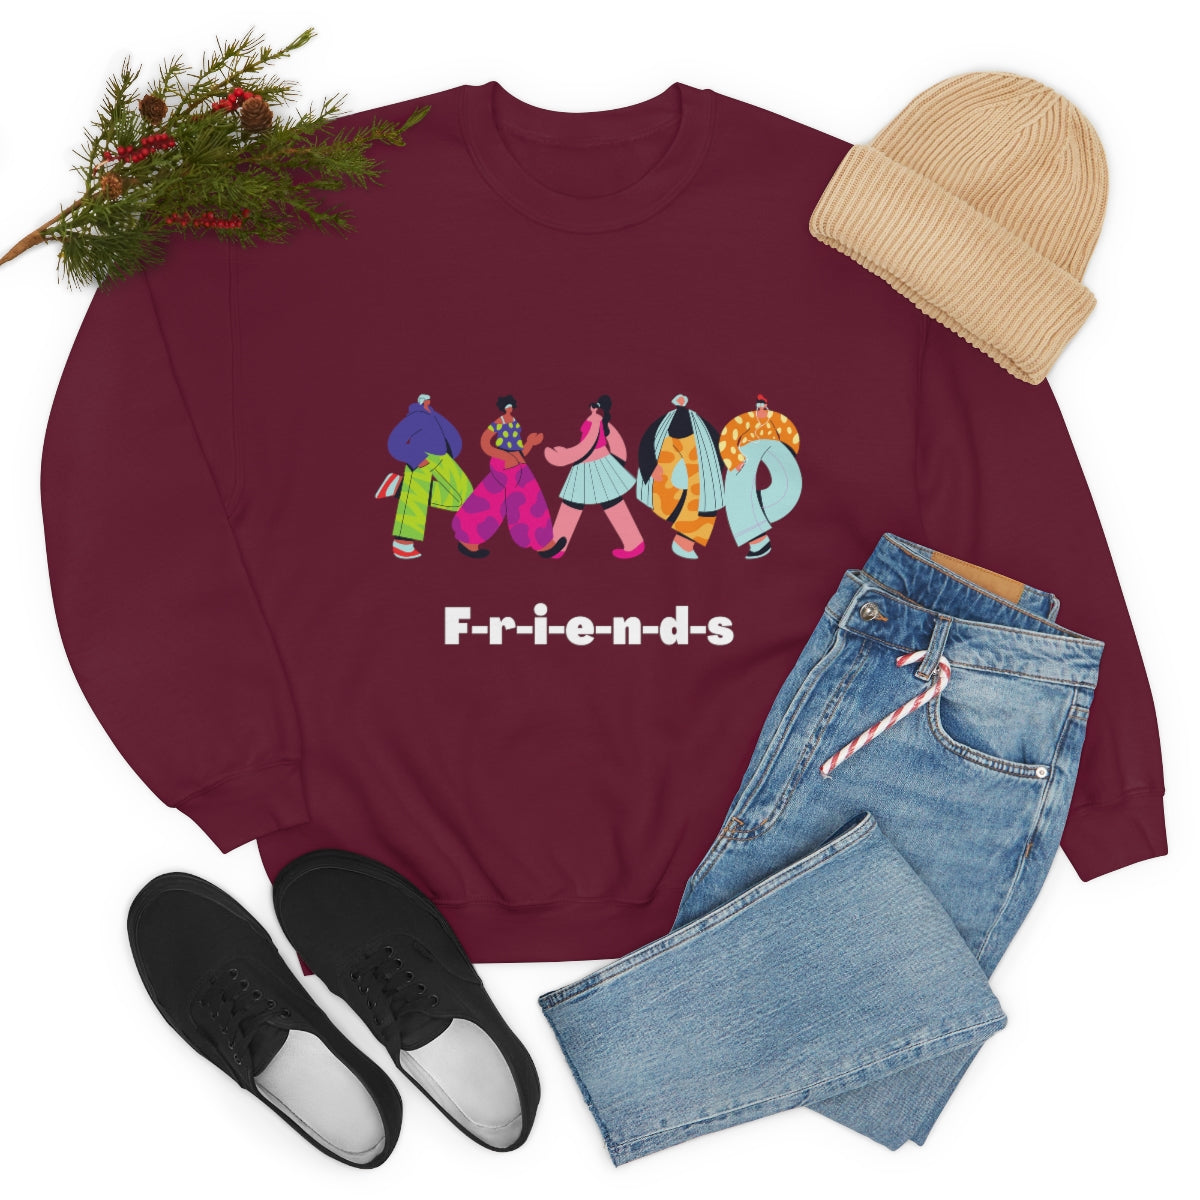 FRIENDS SWEATSHIRT, FRIENDS PARTY, FRIEND'S BIRTHDAY, GRADUATE PARTY DRESS, BRIDESMAID GIFTS, GROOMMENS GIFTS